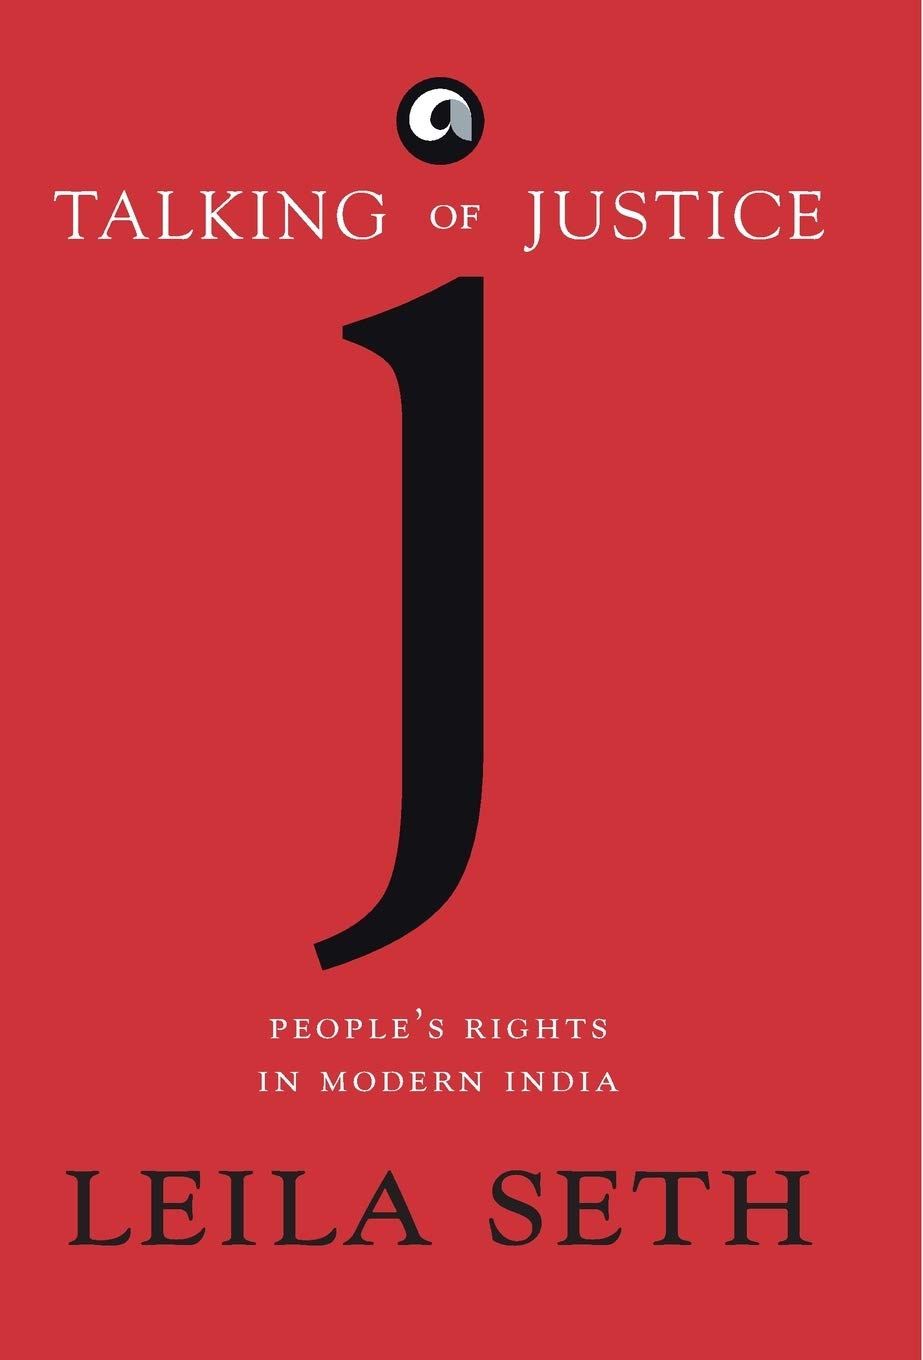 TALKING OF JUSTICE People’s Rights in Modern India